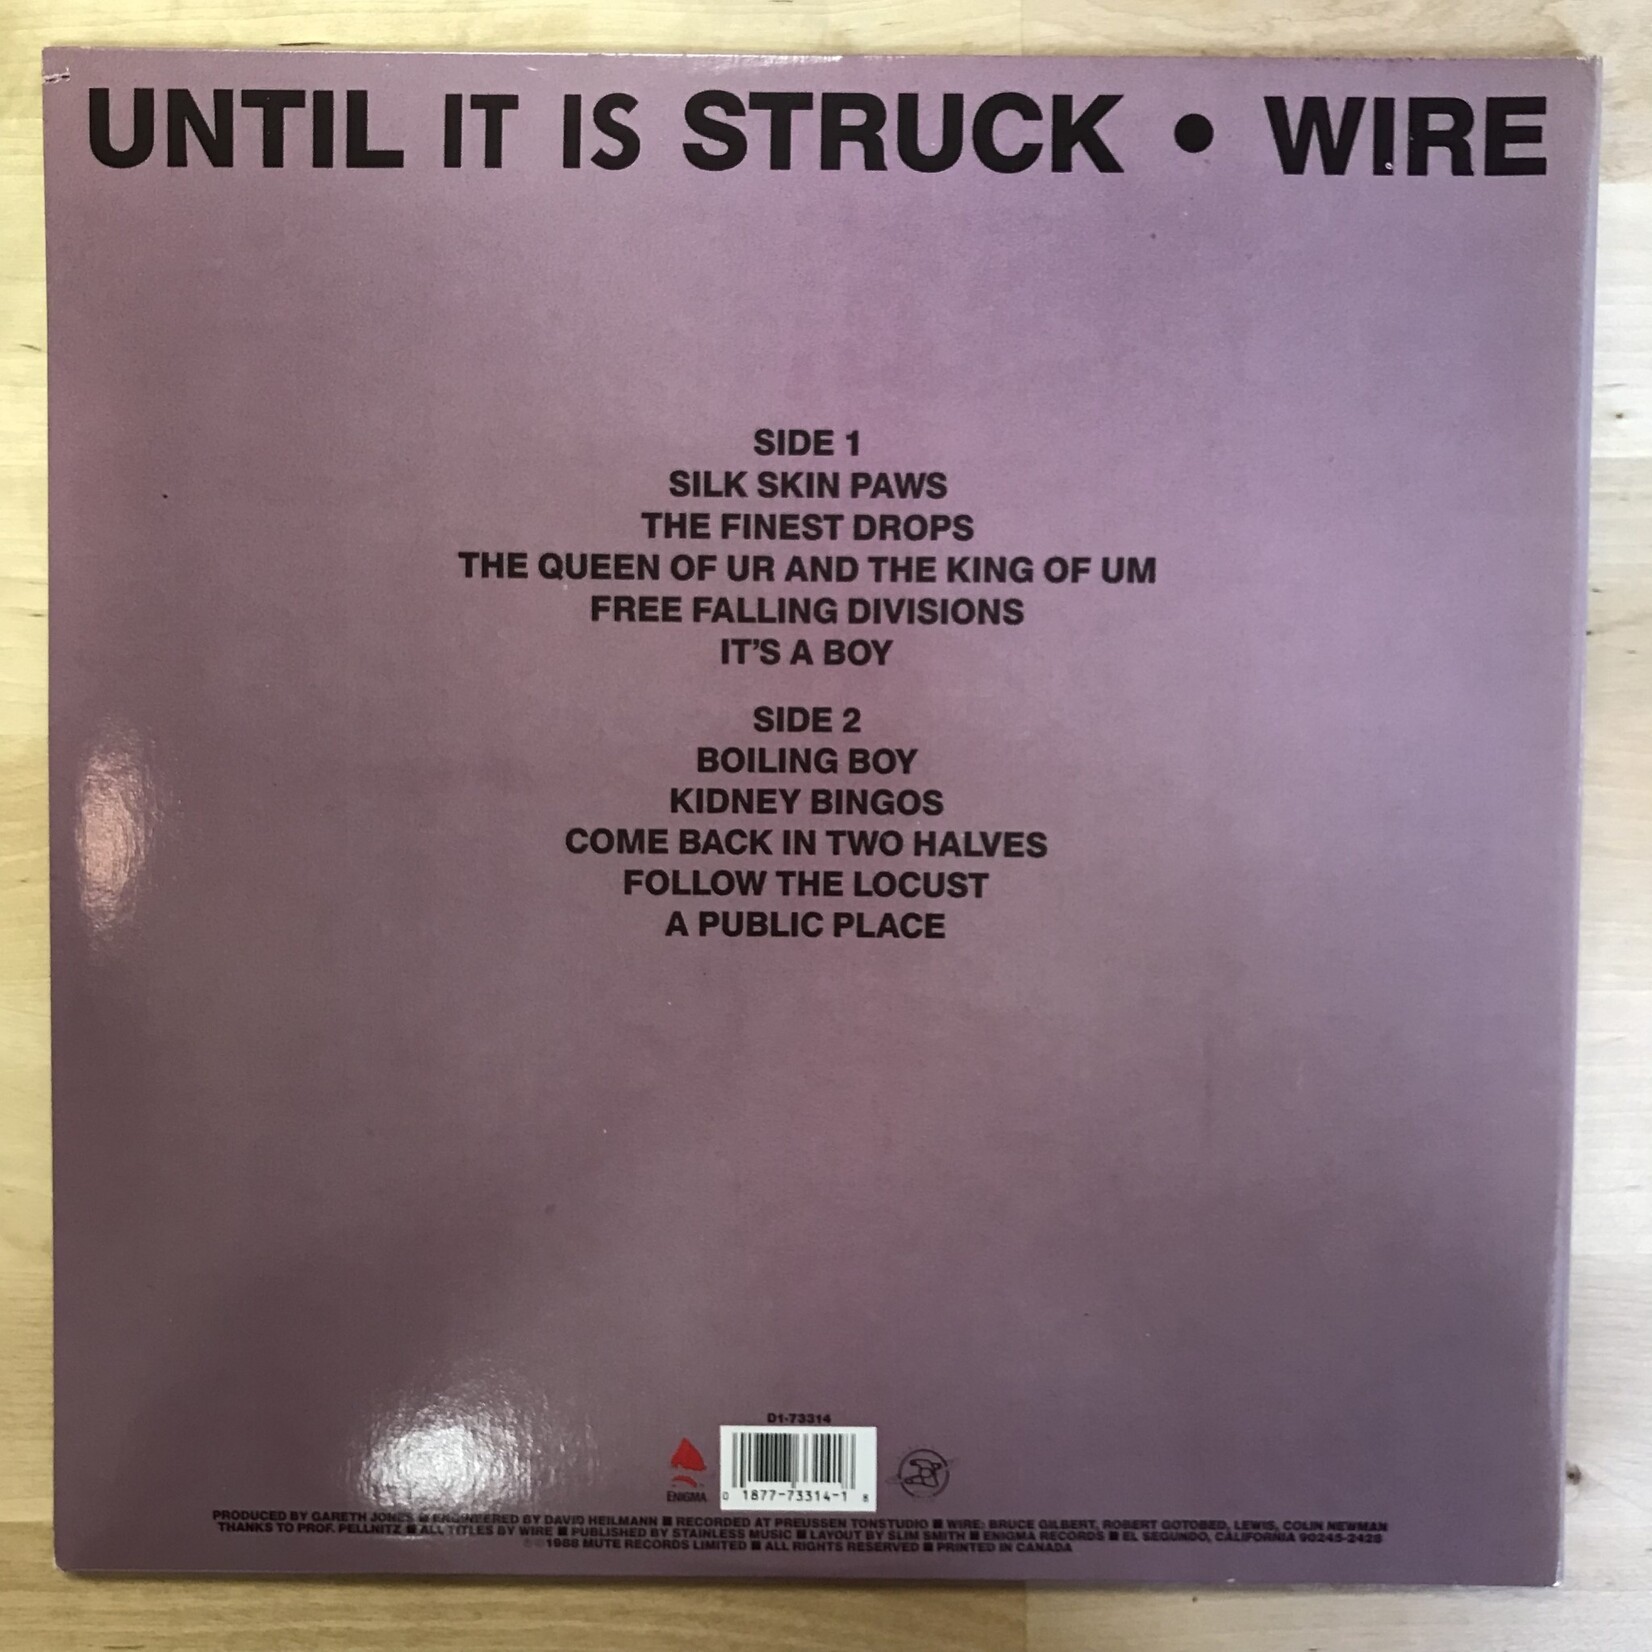 Wire - A Bell Is A Cup - D1 73314 - Vinyl LP (USED)